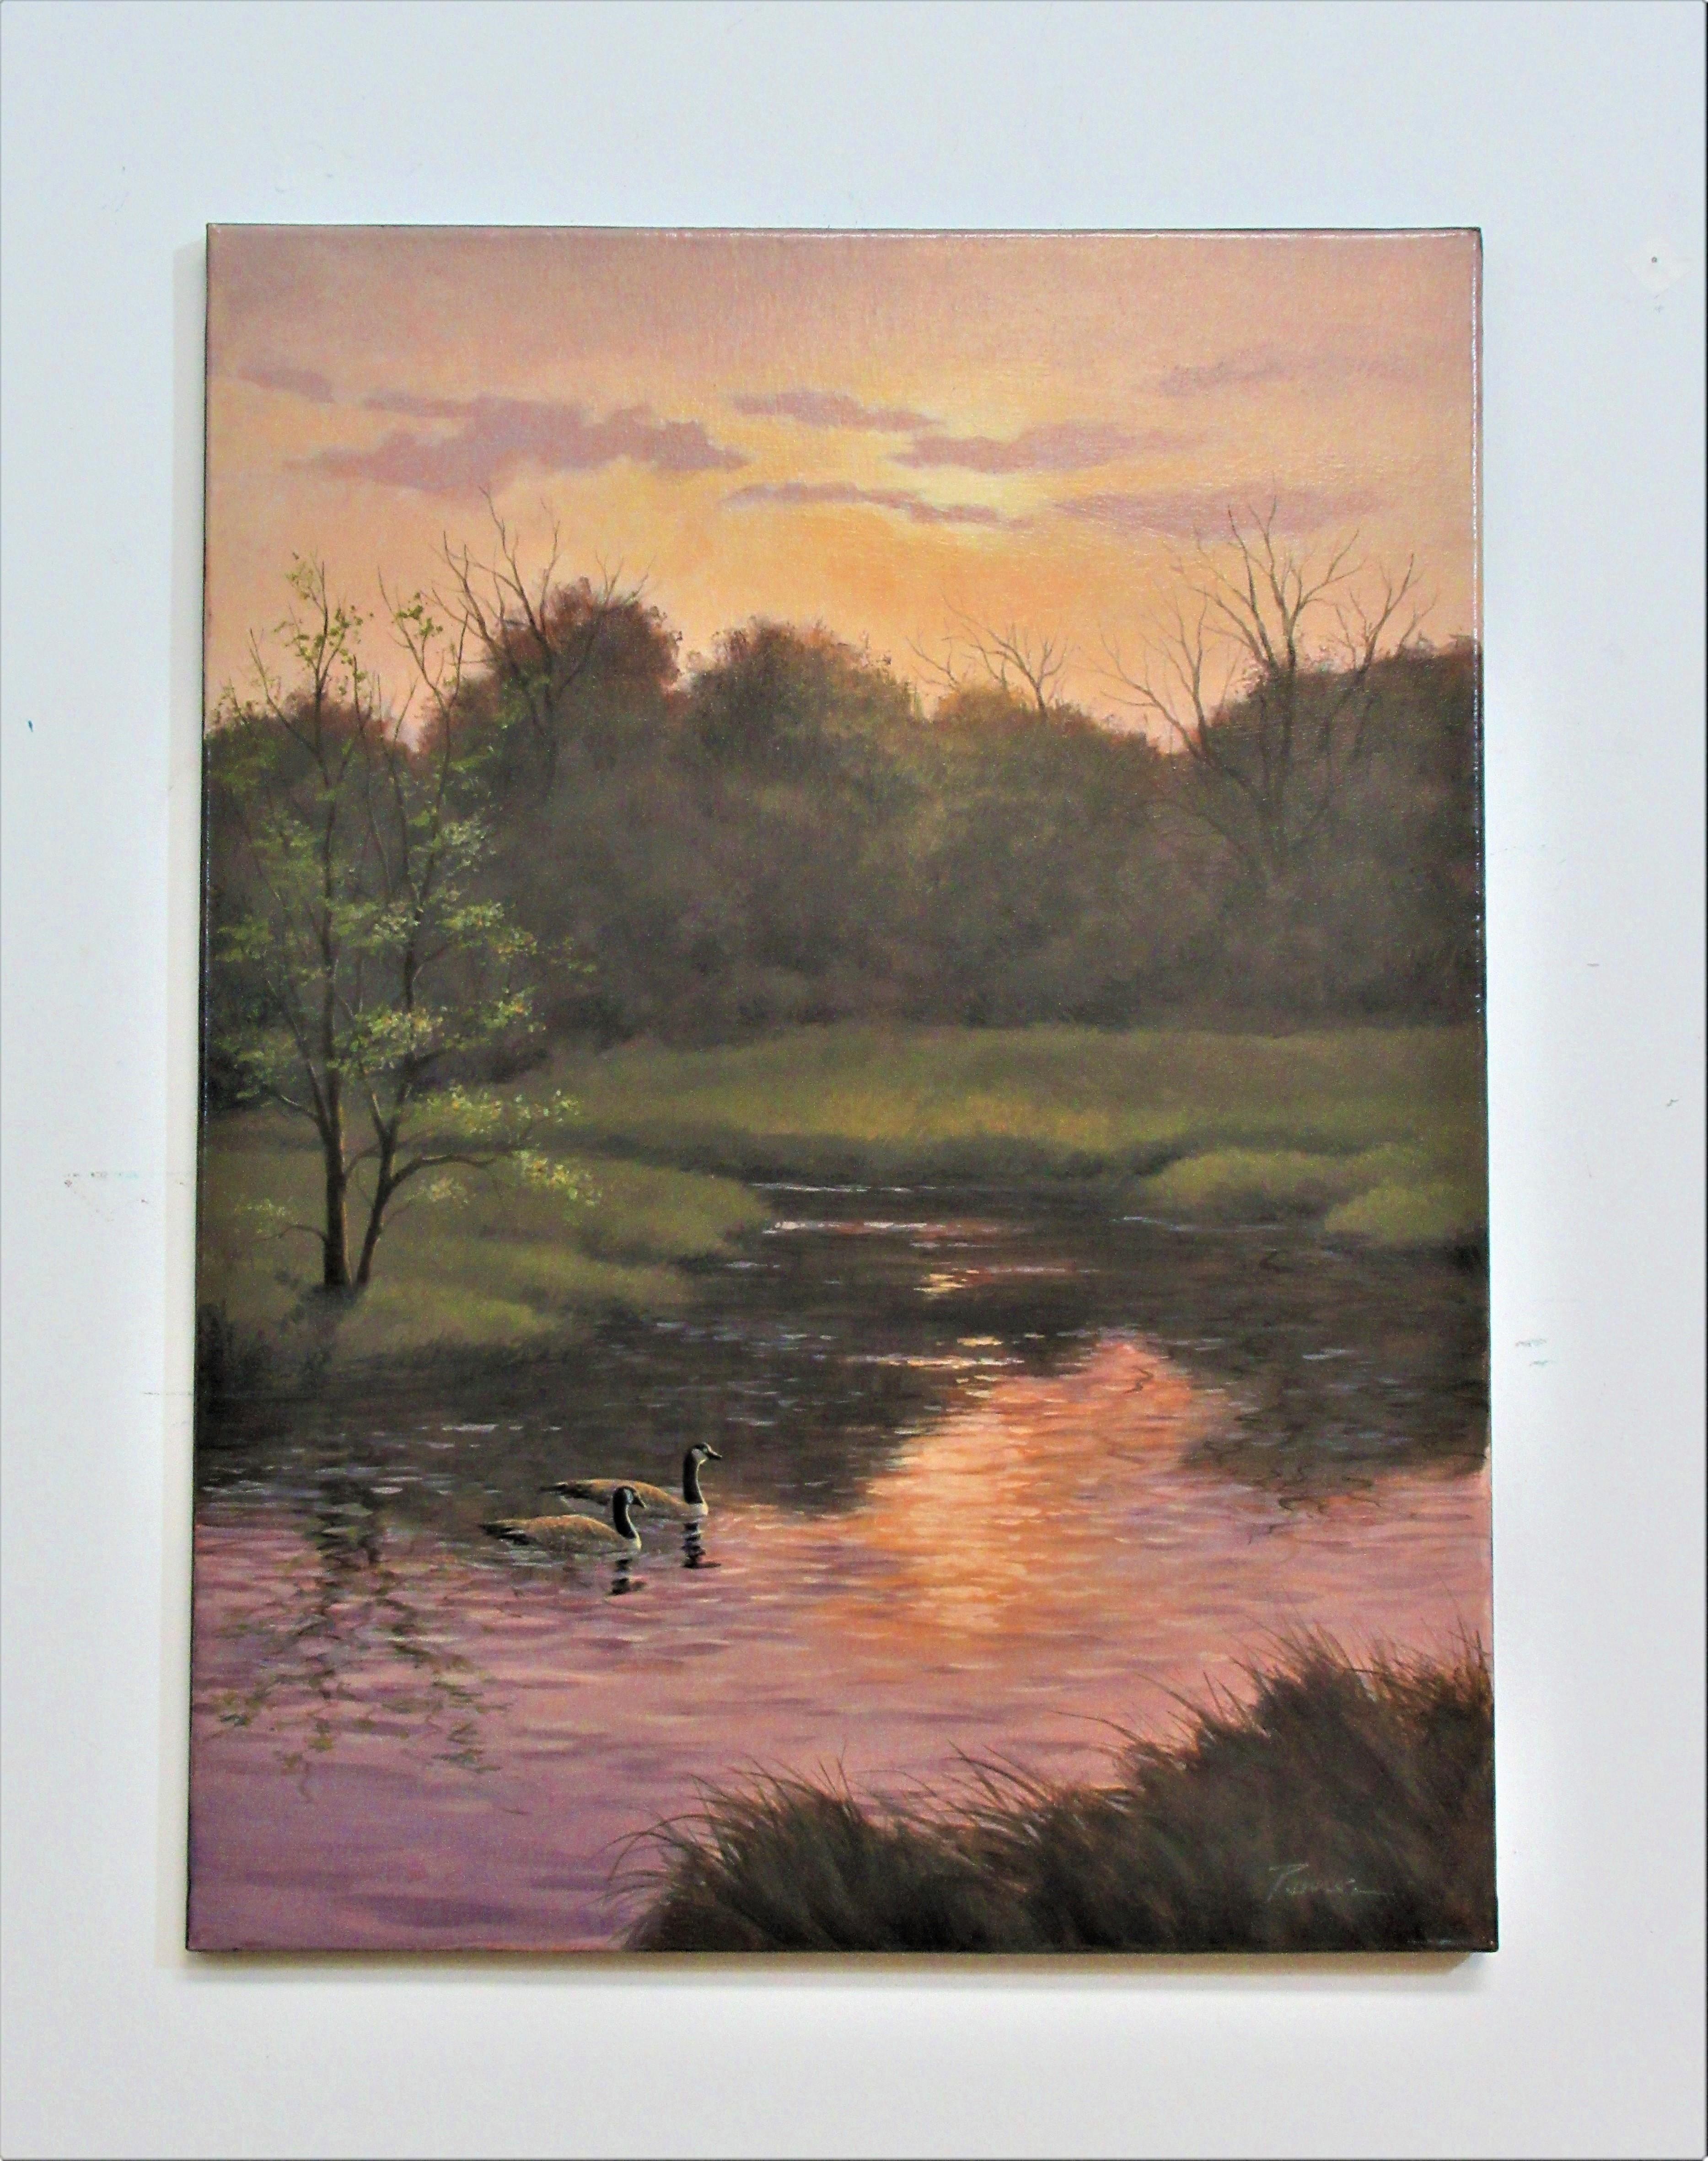 <p>Artist Comments<br>Artist Robert Pennor demonstrates an impressionist scene of the tranquil end of a river. Soft, harmonious colors blend with the glow of the warm setting sun. A pair of Canadian geese peacefully float along the gentle stream.